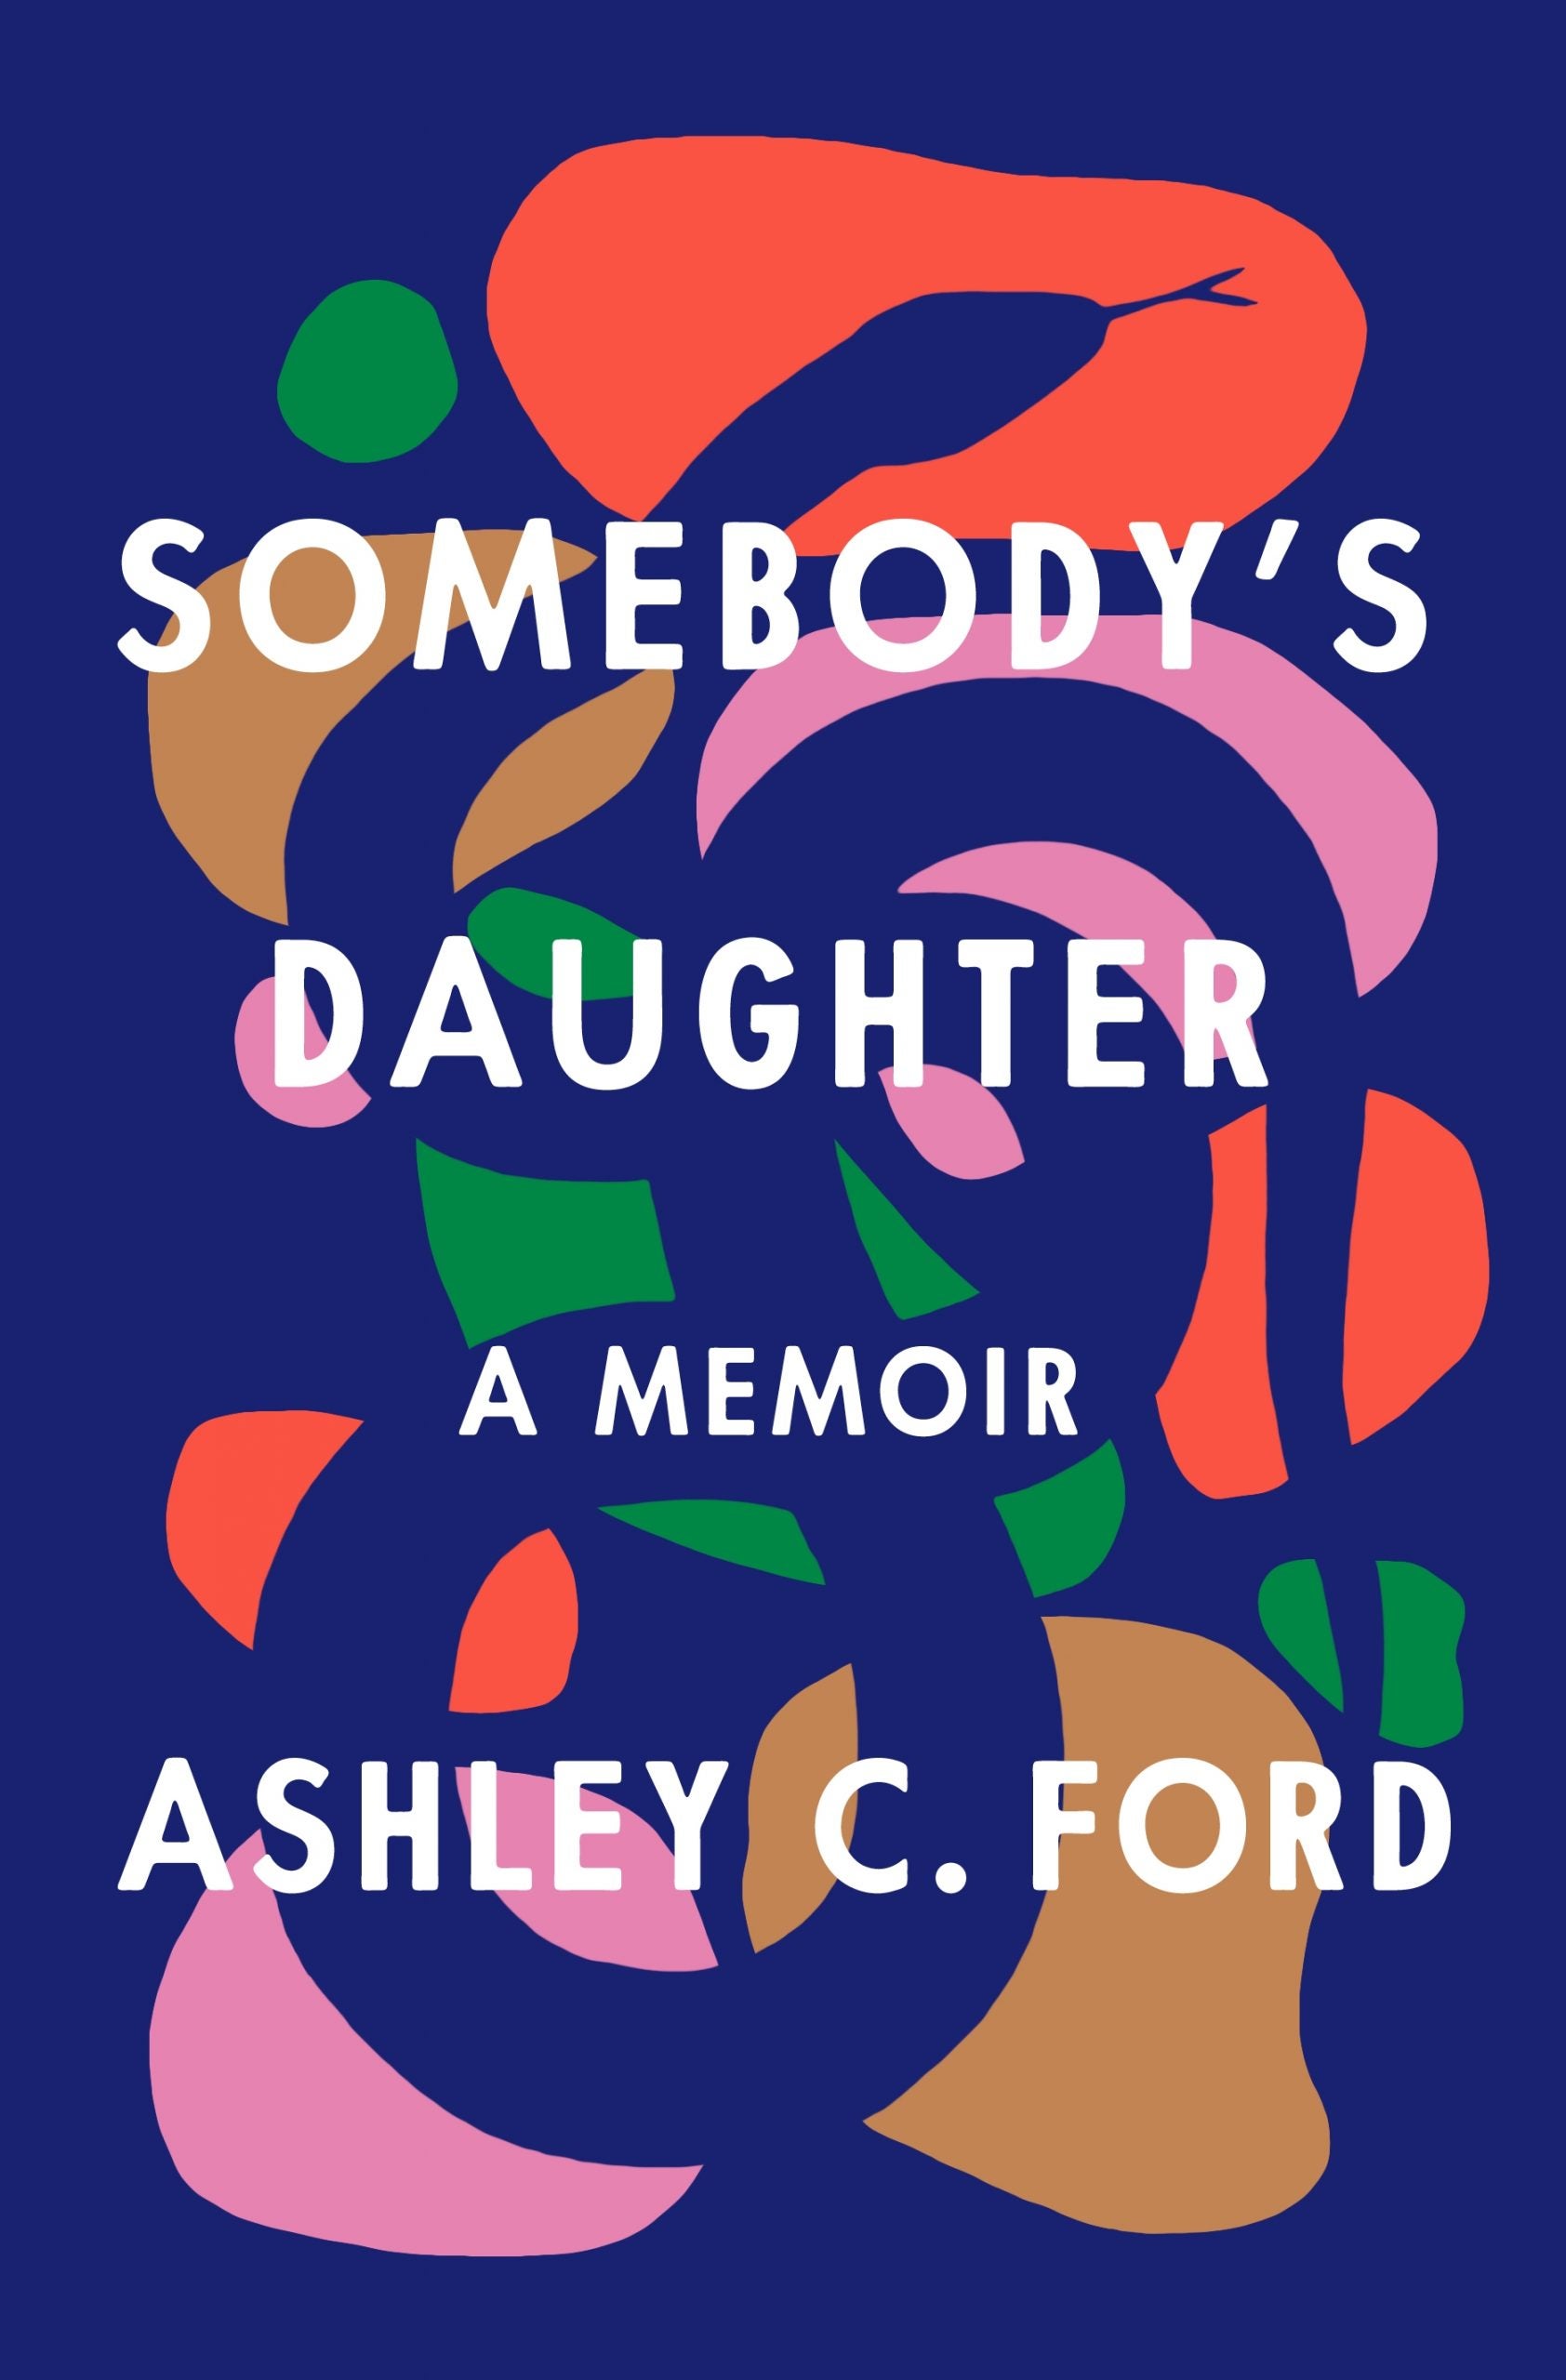 Ashley C. Ford Shows The Strength Of Vulnerability In Her New Memoir ‘Somebody’s Daughter’